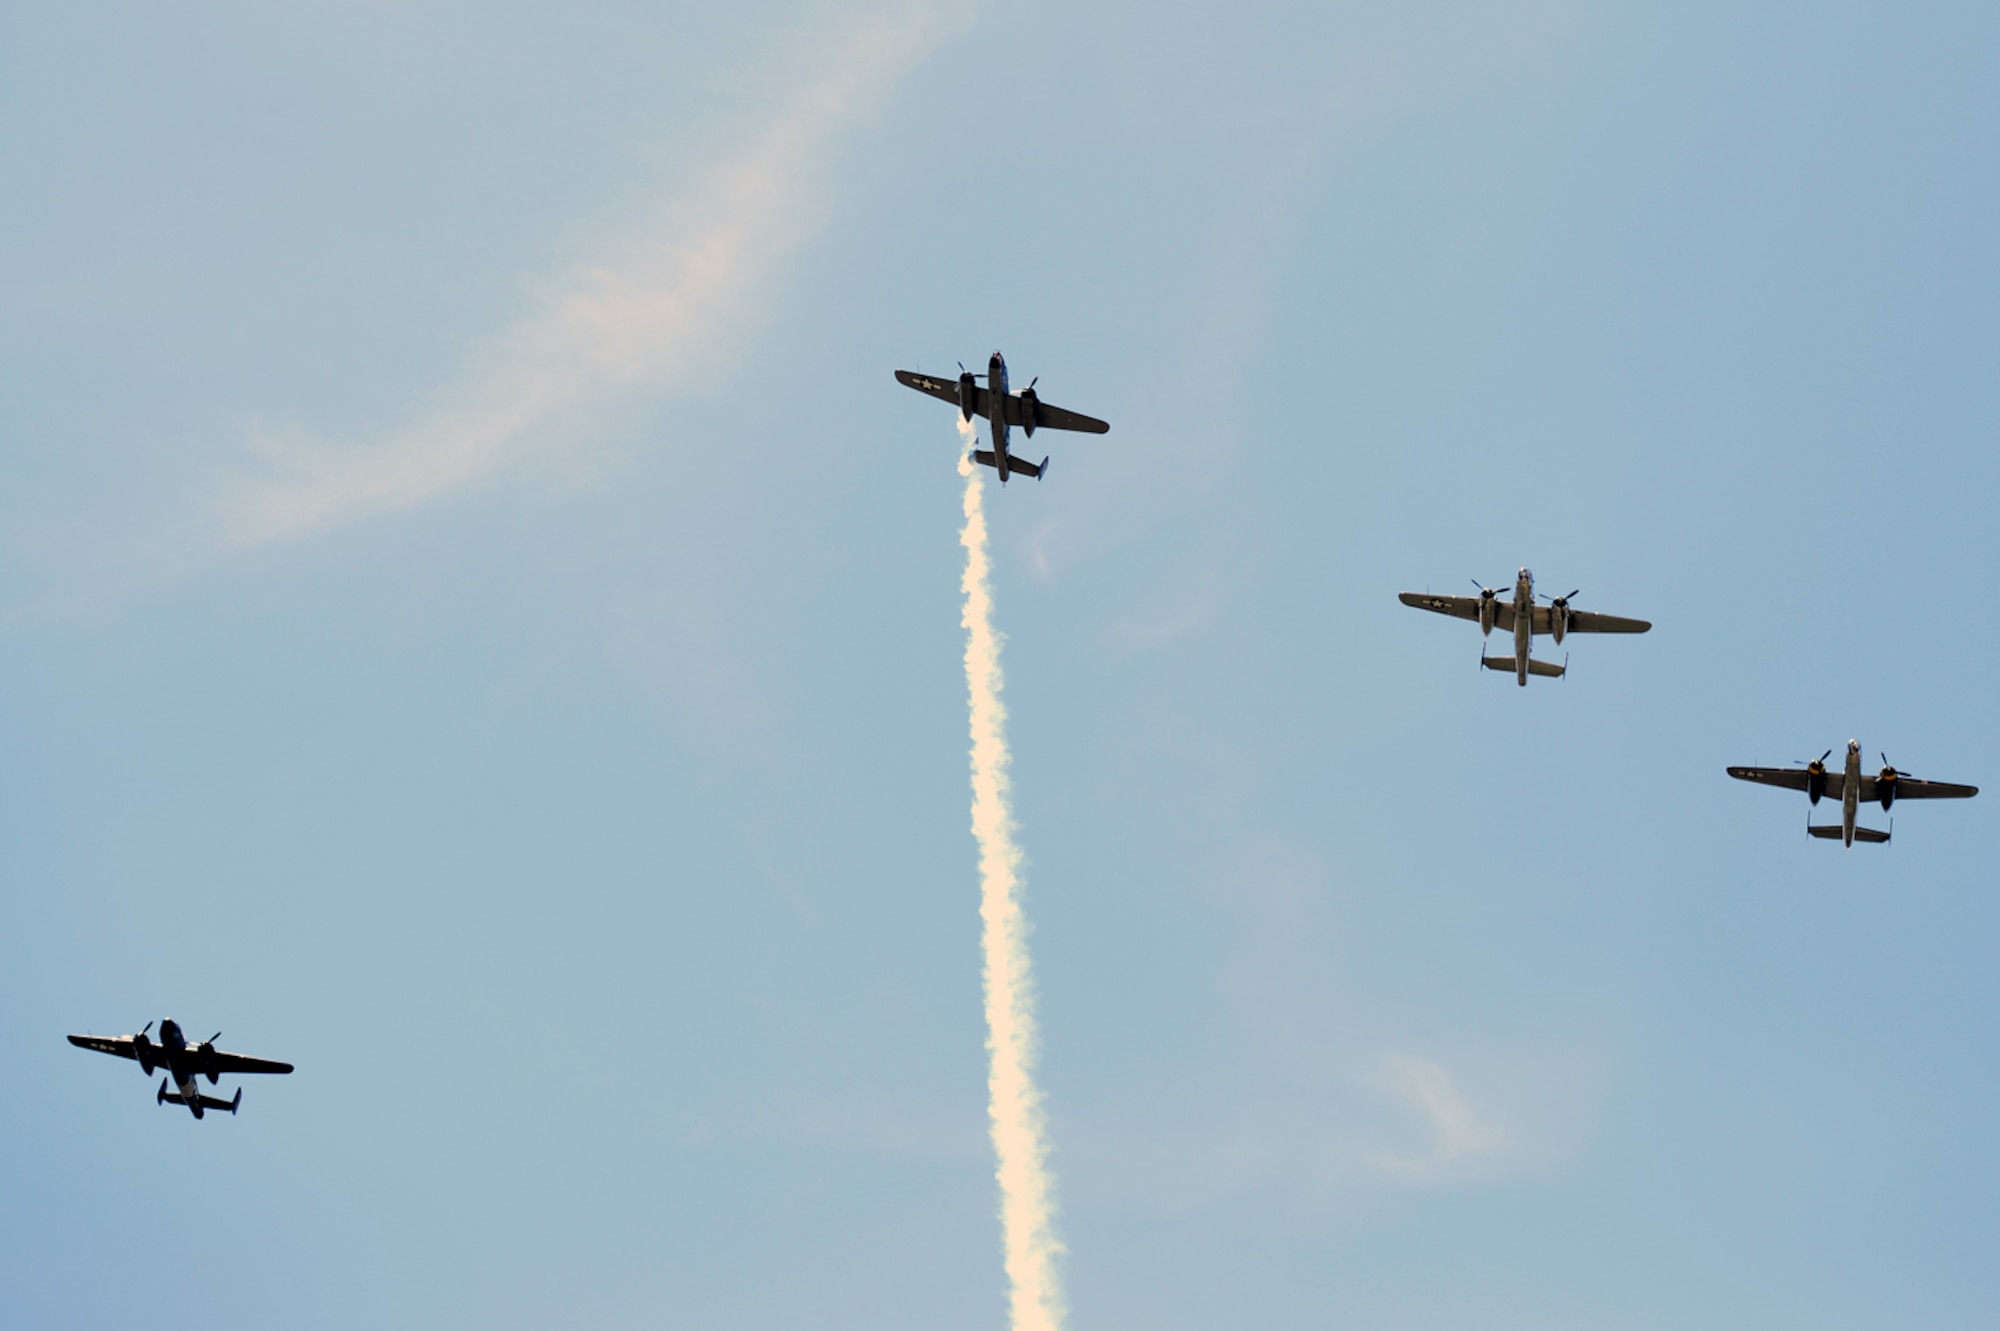 Four B-25 bombers fly the "Missing Man" formation over the Memorial Service honoring the 75th anniversary of the Doolittle Japan Raid on April 18, 1942. The memorial service, held at the National Museum of the United States Air Force April 18, 2017, included two B-25 fly-overs. The first was a typical bomber staggered formation, and included 11 aircraft. The second was the Missing Man formation and honored the 79 members of the original Raiders who have passed. The last living Raider, Lt. Col. Richard Cole, was a participant in the memorial ceremony.  (U.S. Air Force photo/Wesley Farnsworth)